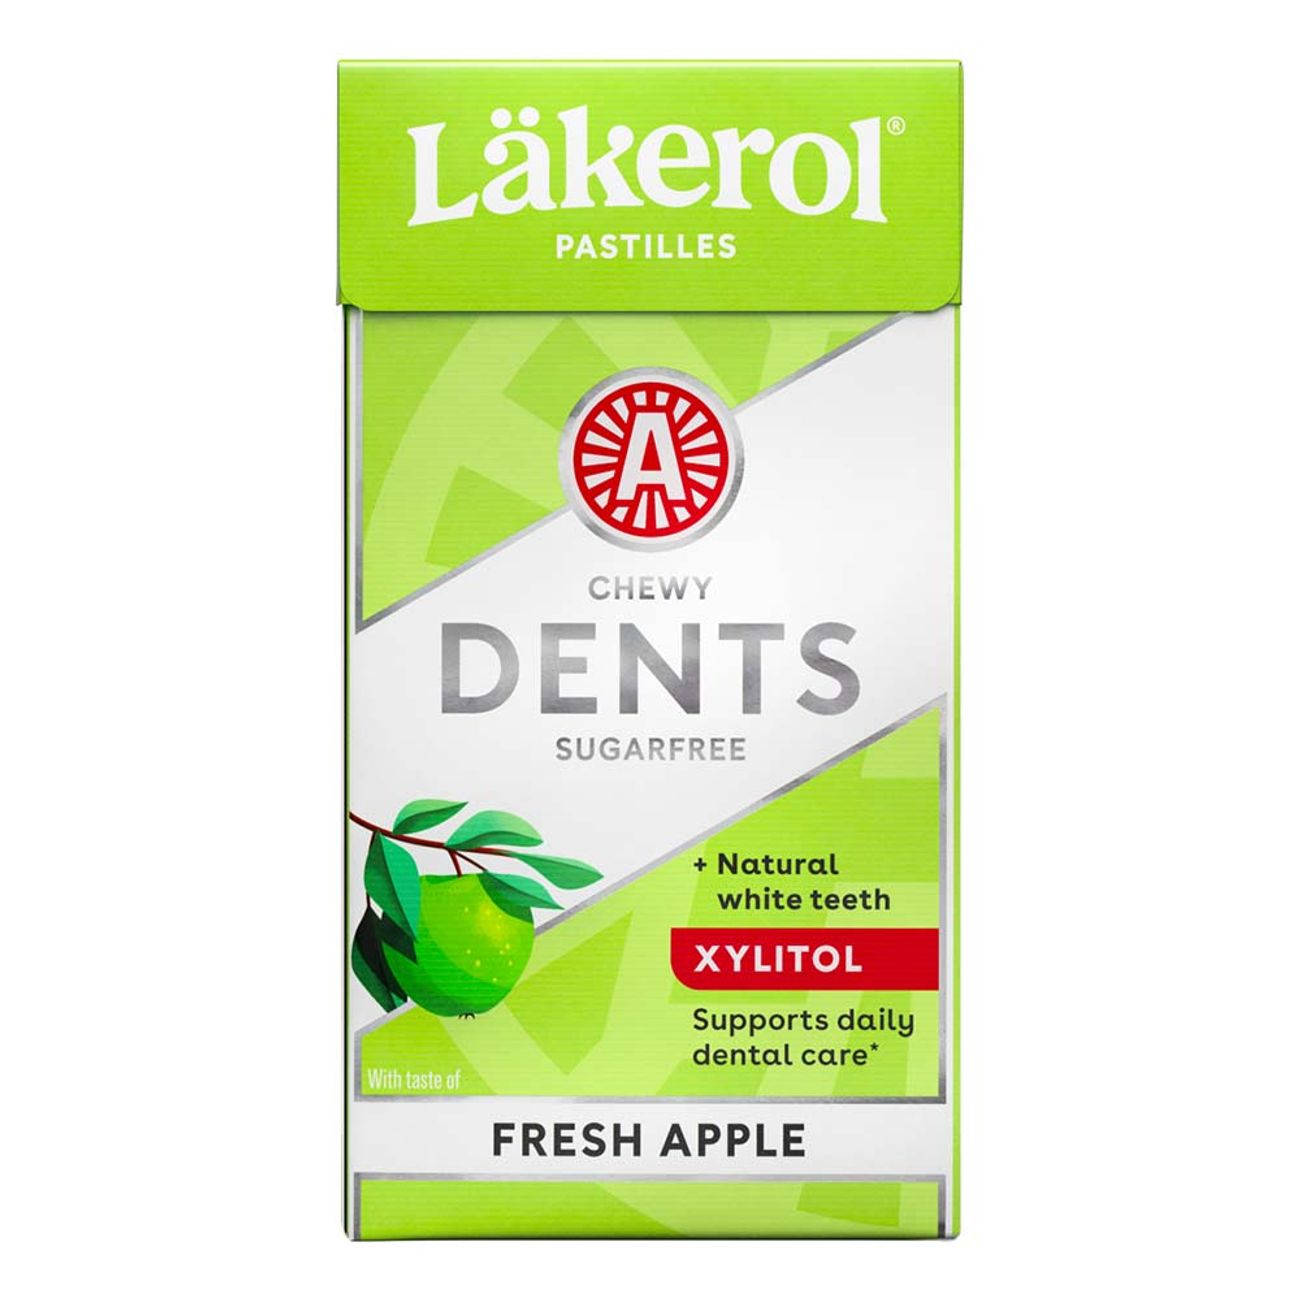 lakerol-chewy-dents-fresh-apple-ask-94902-1